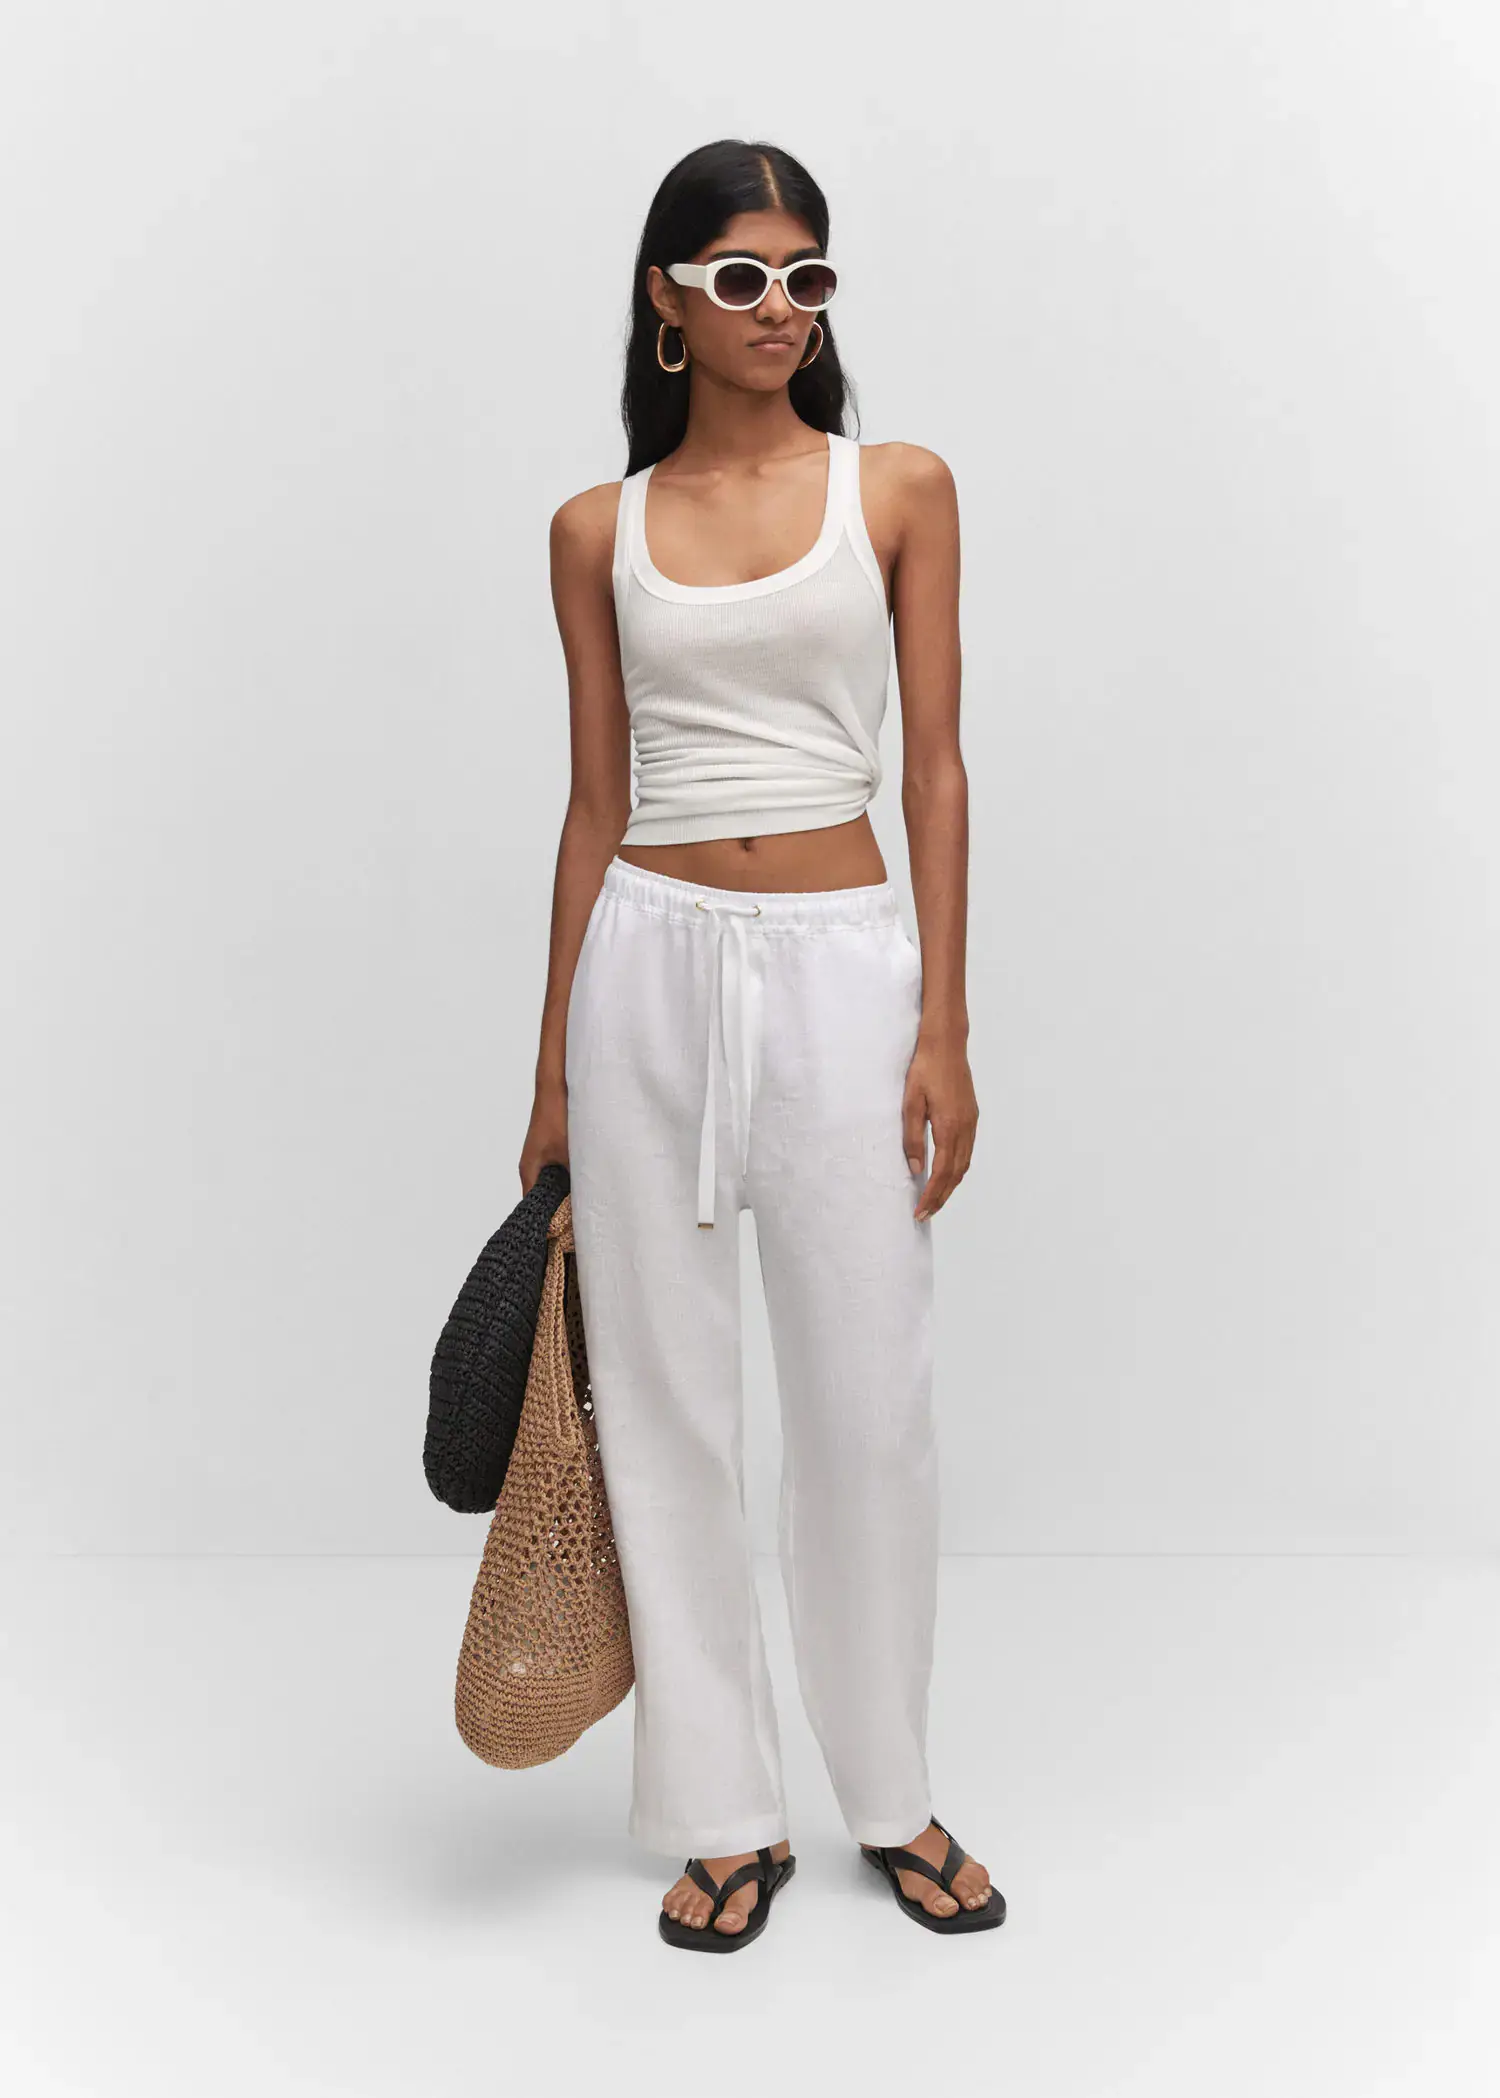 Mango Bow linen pants. a woman in a white outfit holding a straw bag. 